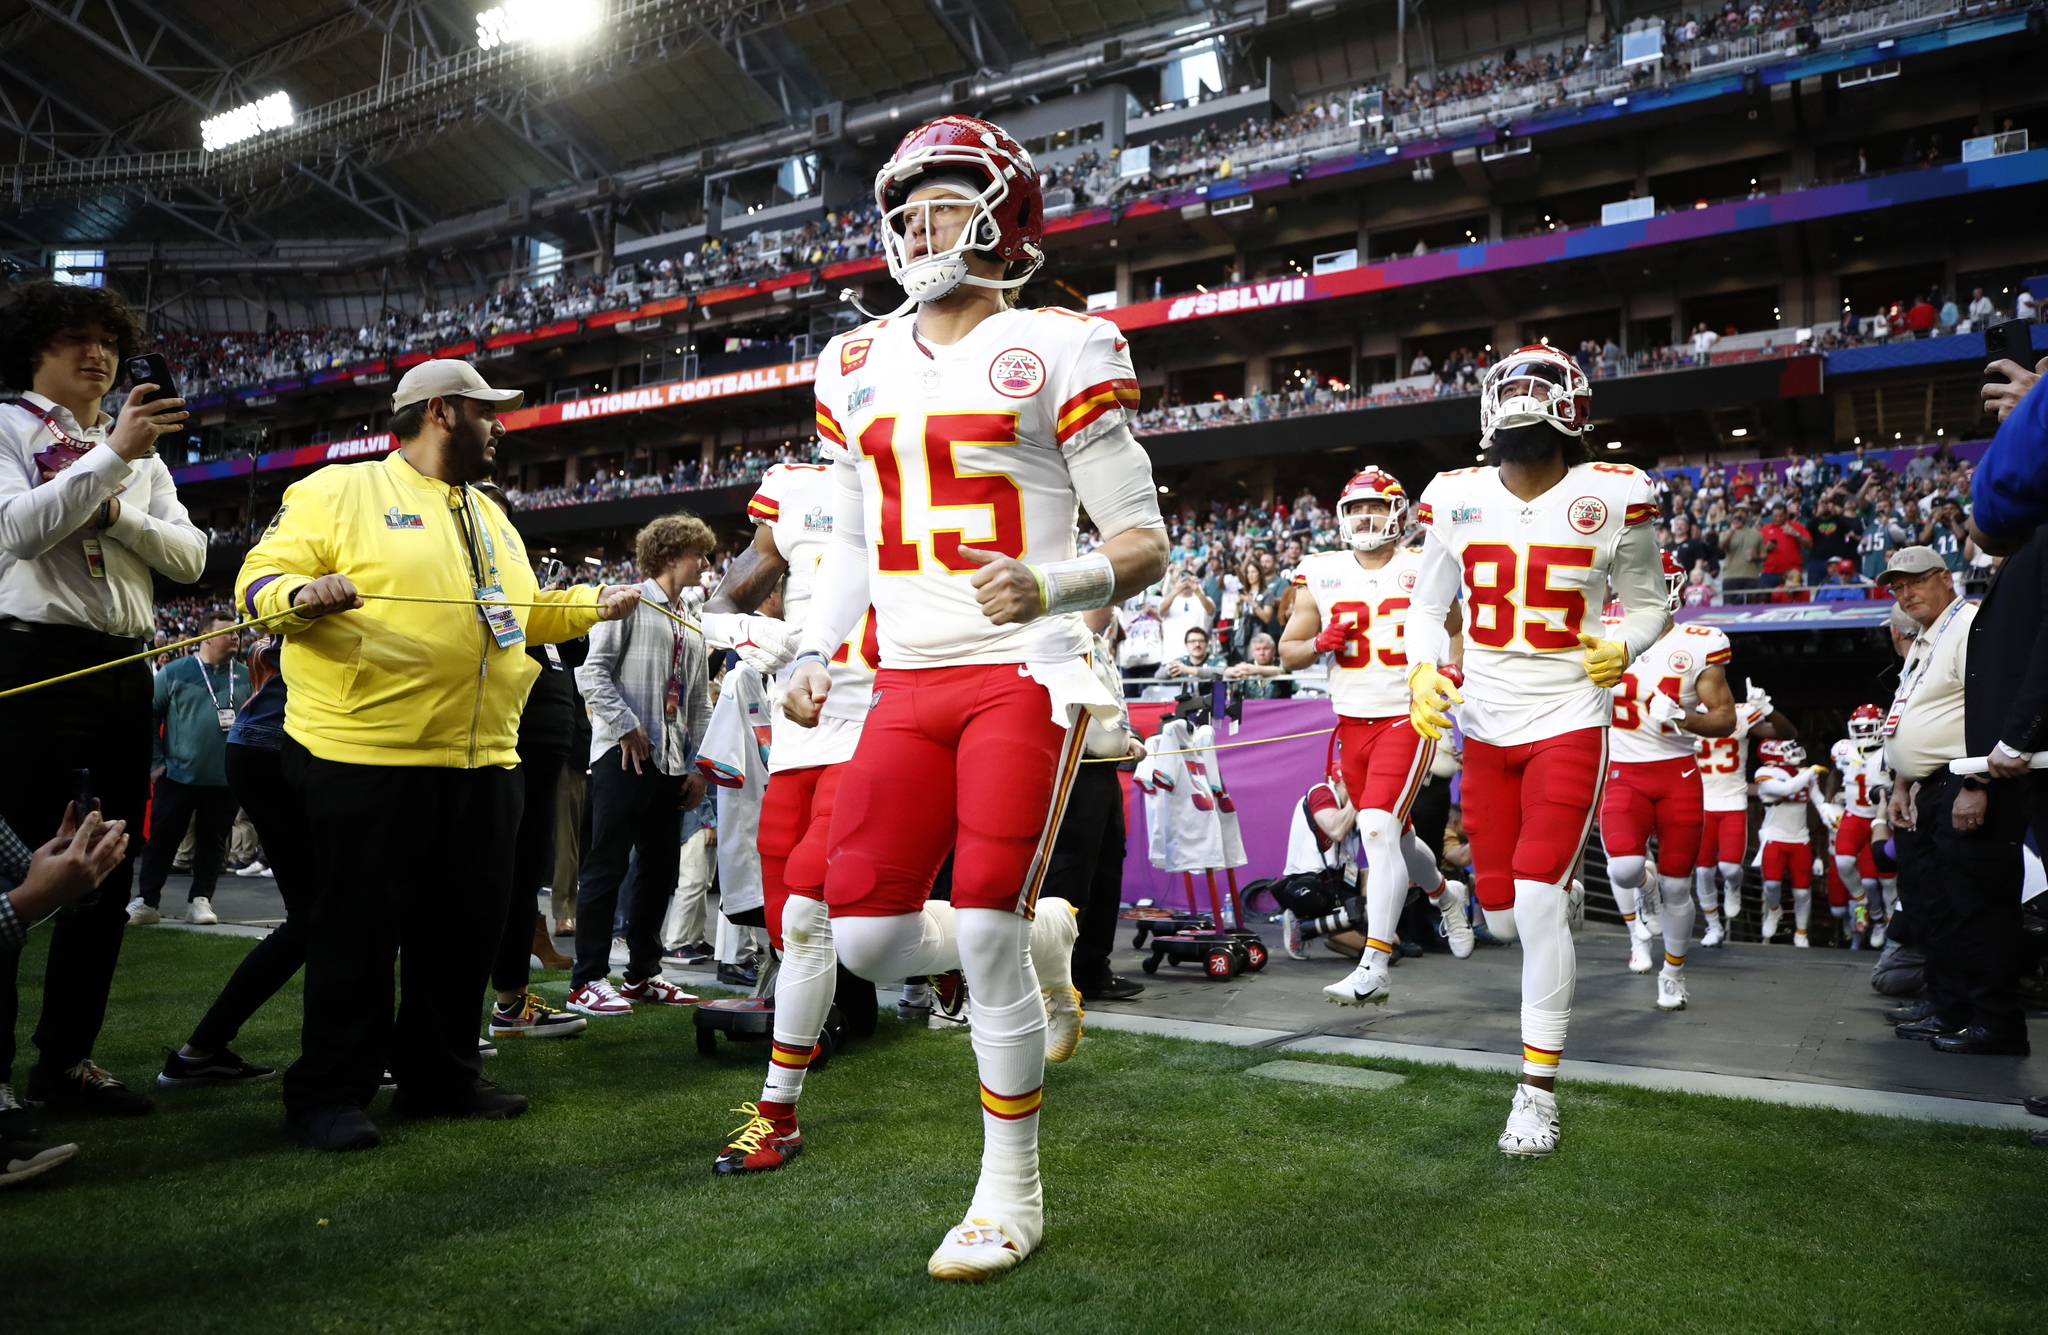 Glendale (United States), 12/02/2023.- Kansas City Chiefs quarterback Patrick Mahomes (L) leads the Chiefs onto the field for warm ups prior to the start of  lt;HIT gt;Super lt;/HIT gt;  lt;HIT gt;Bowl lt;/HIT gt; LVII between the AFC champion Kansas City Chiefs and the NFC champion Philadelphia Eagles at State Farm Stadium in Glendale, Arizona, 12 February 2023. The annual  lt;HIT gt;Super lt;/HIT gt;  lt;HIT gt;Bowl lt;/HIT gt; is the Championship game of the NFL between the AFC Champion and the NFC Champion and has been held every year since January of 1967. (Estados Unidos, Filadelfia) EFE/EPA/CAROLINE BREHMAN